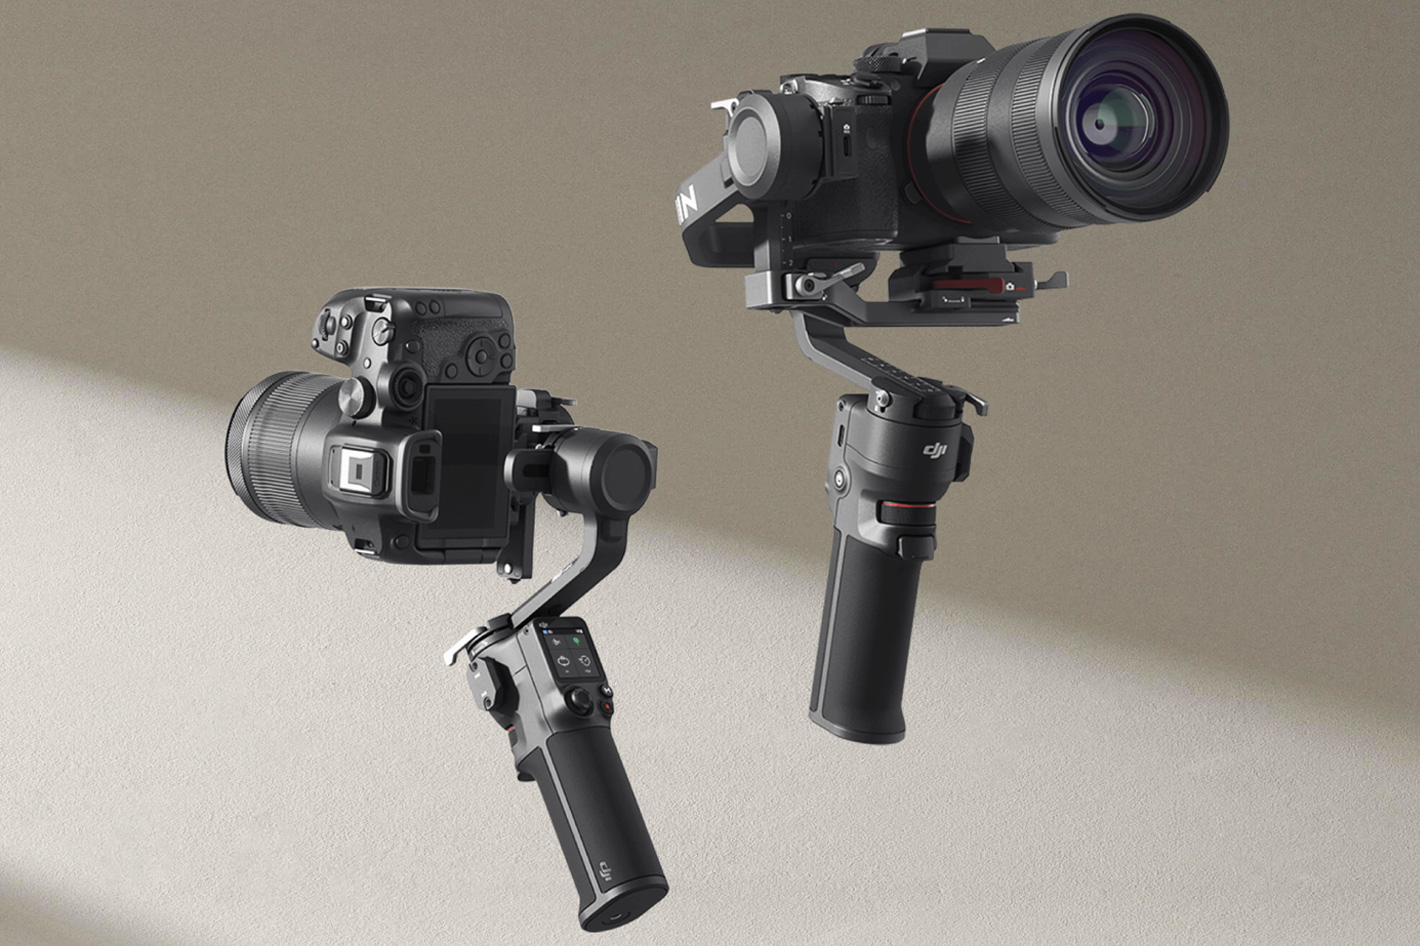 DJI RS 3 Mini: a  new compact and lightweight camera stabilizer